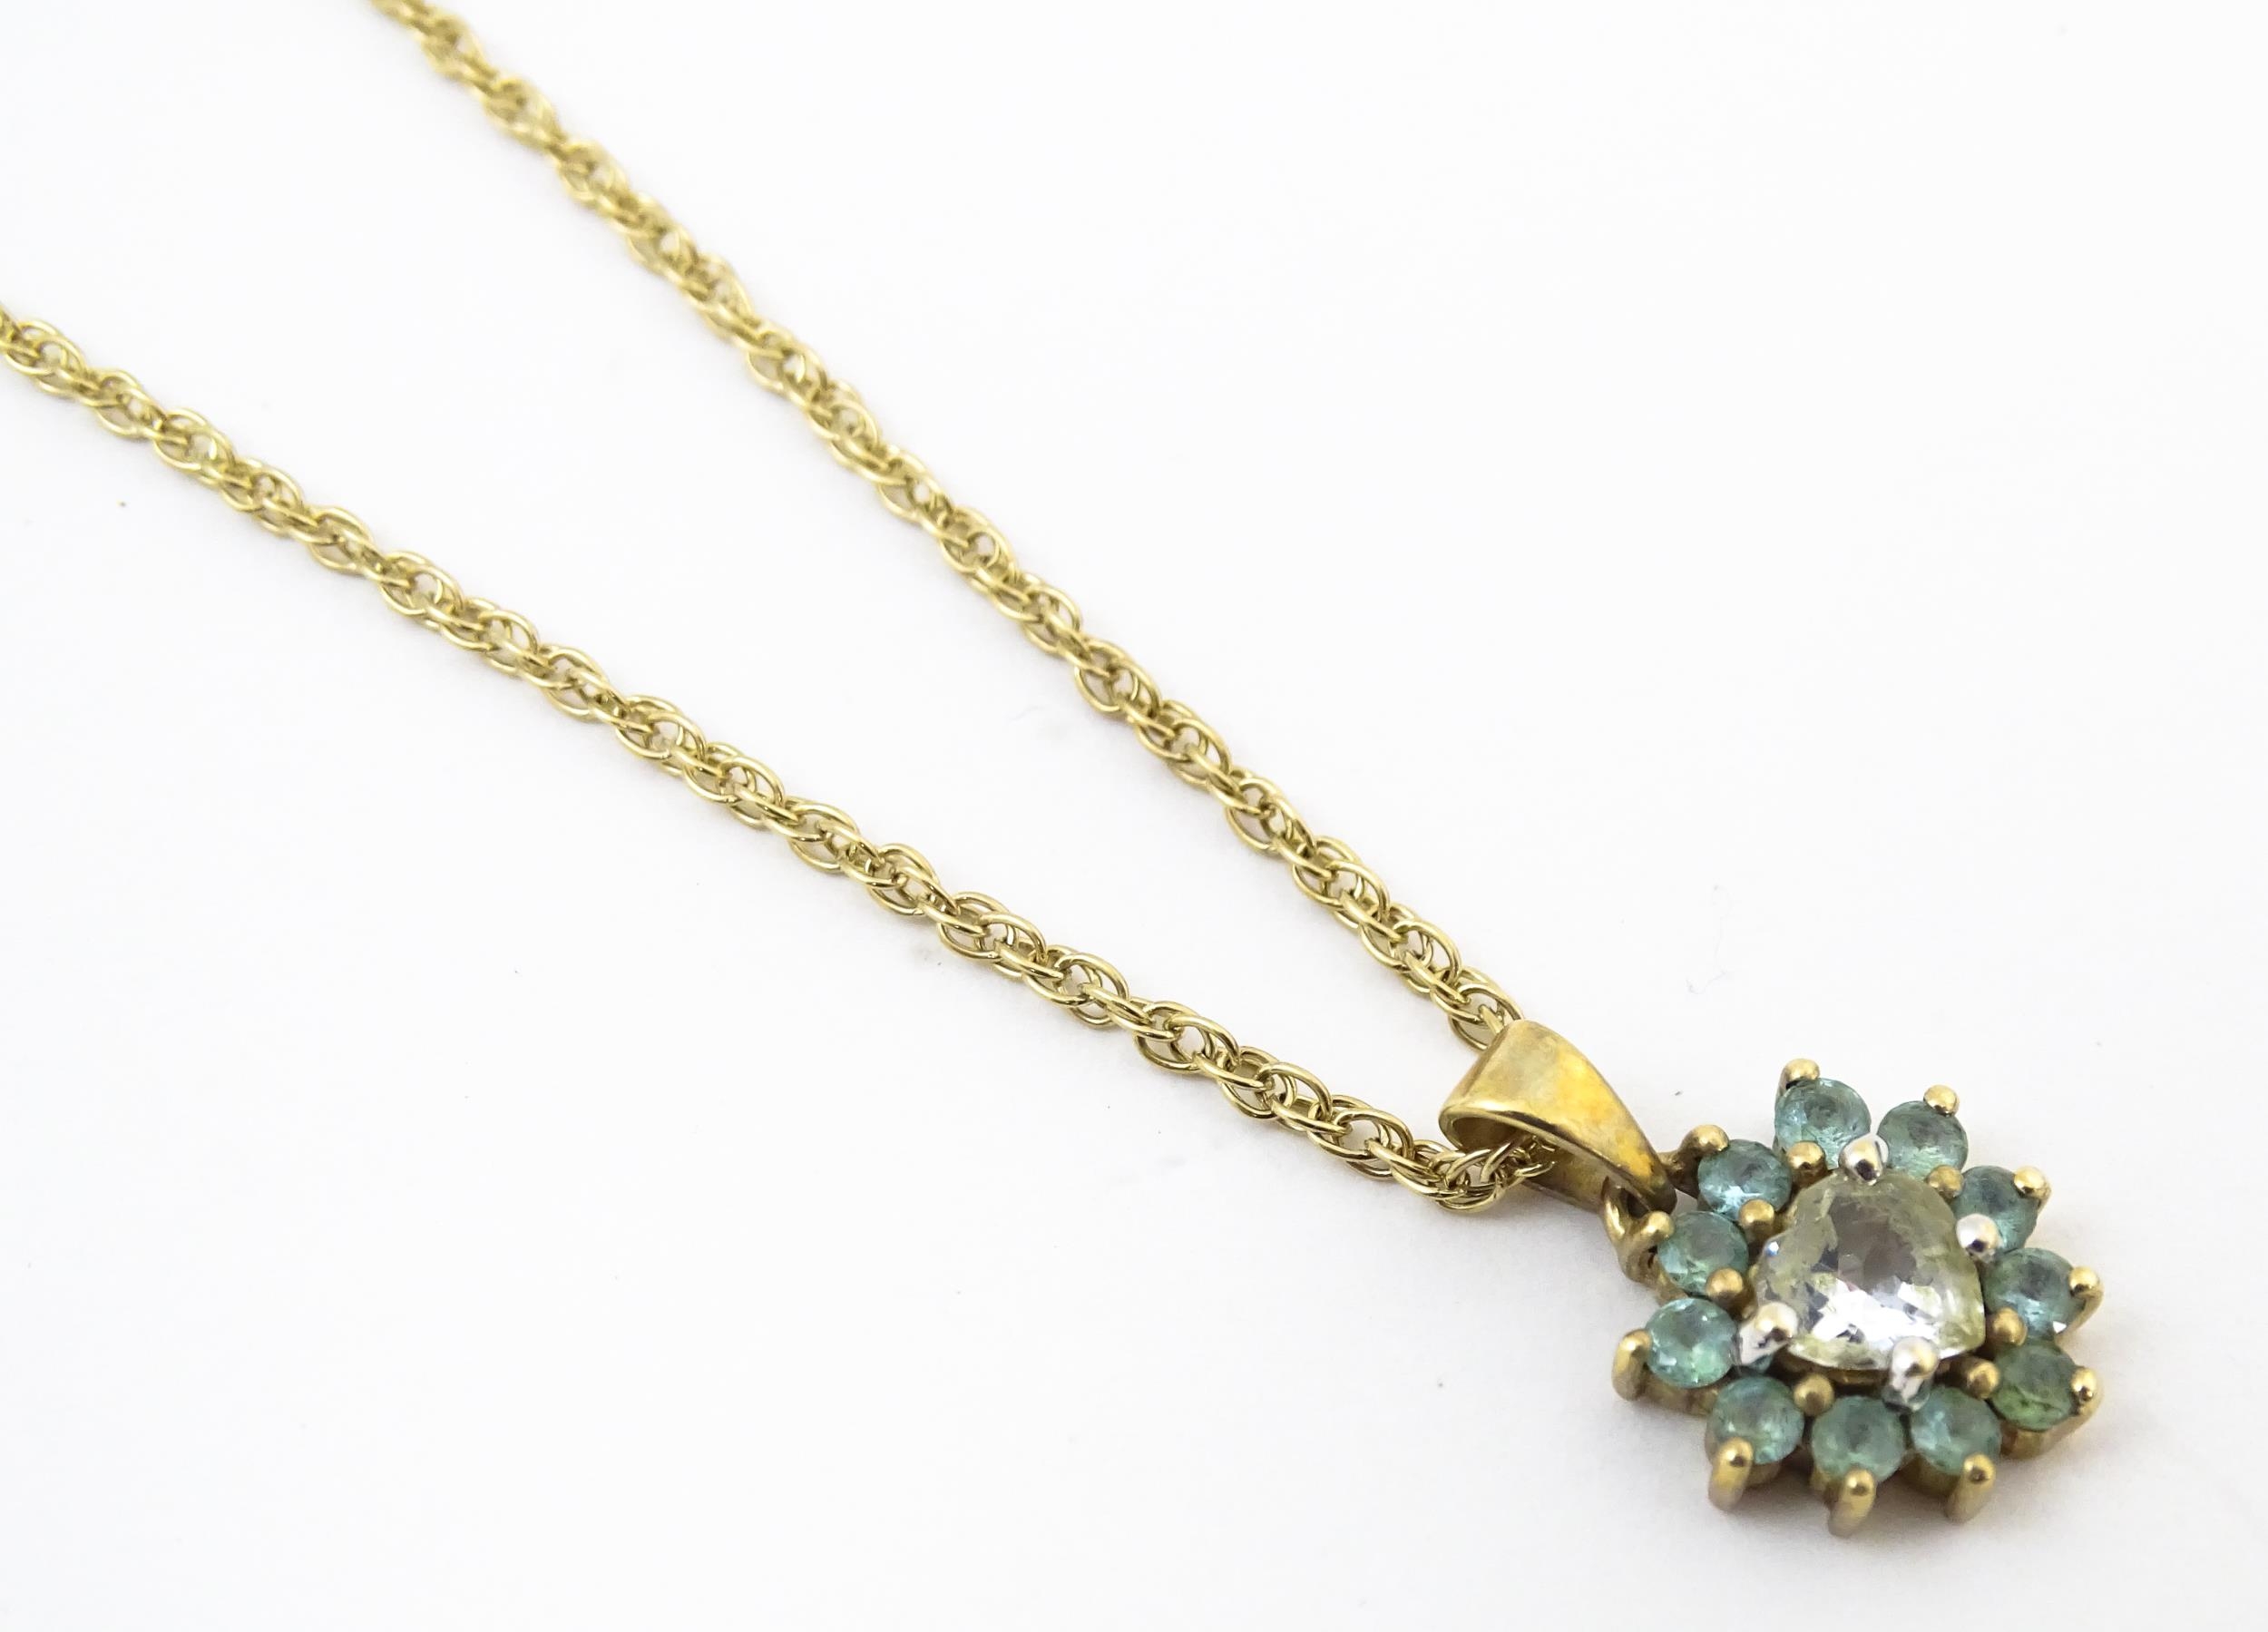 9ct gold pendant set with white and aqua coloured stones, with chain necklace. The chain approx - Image 6 of 10